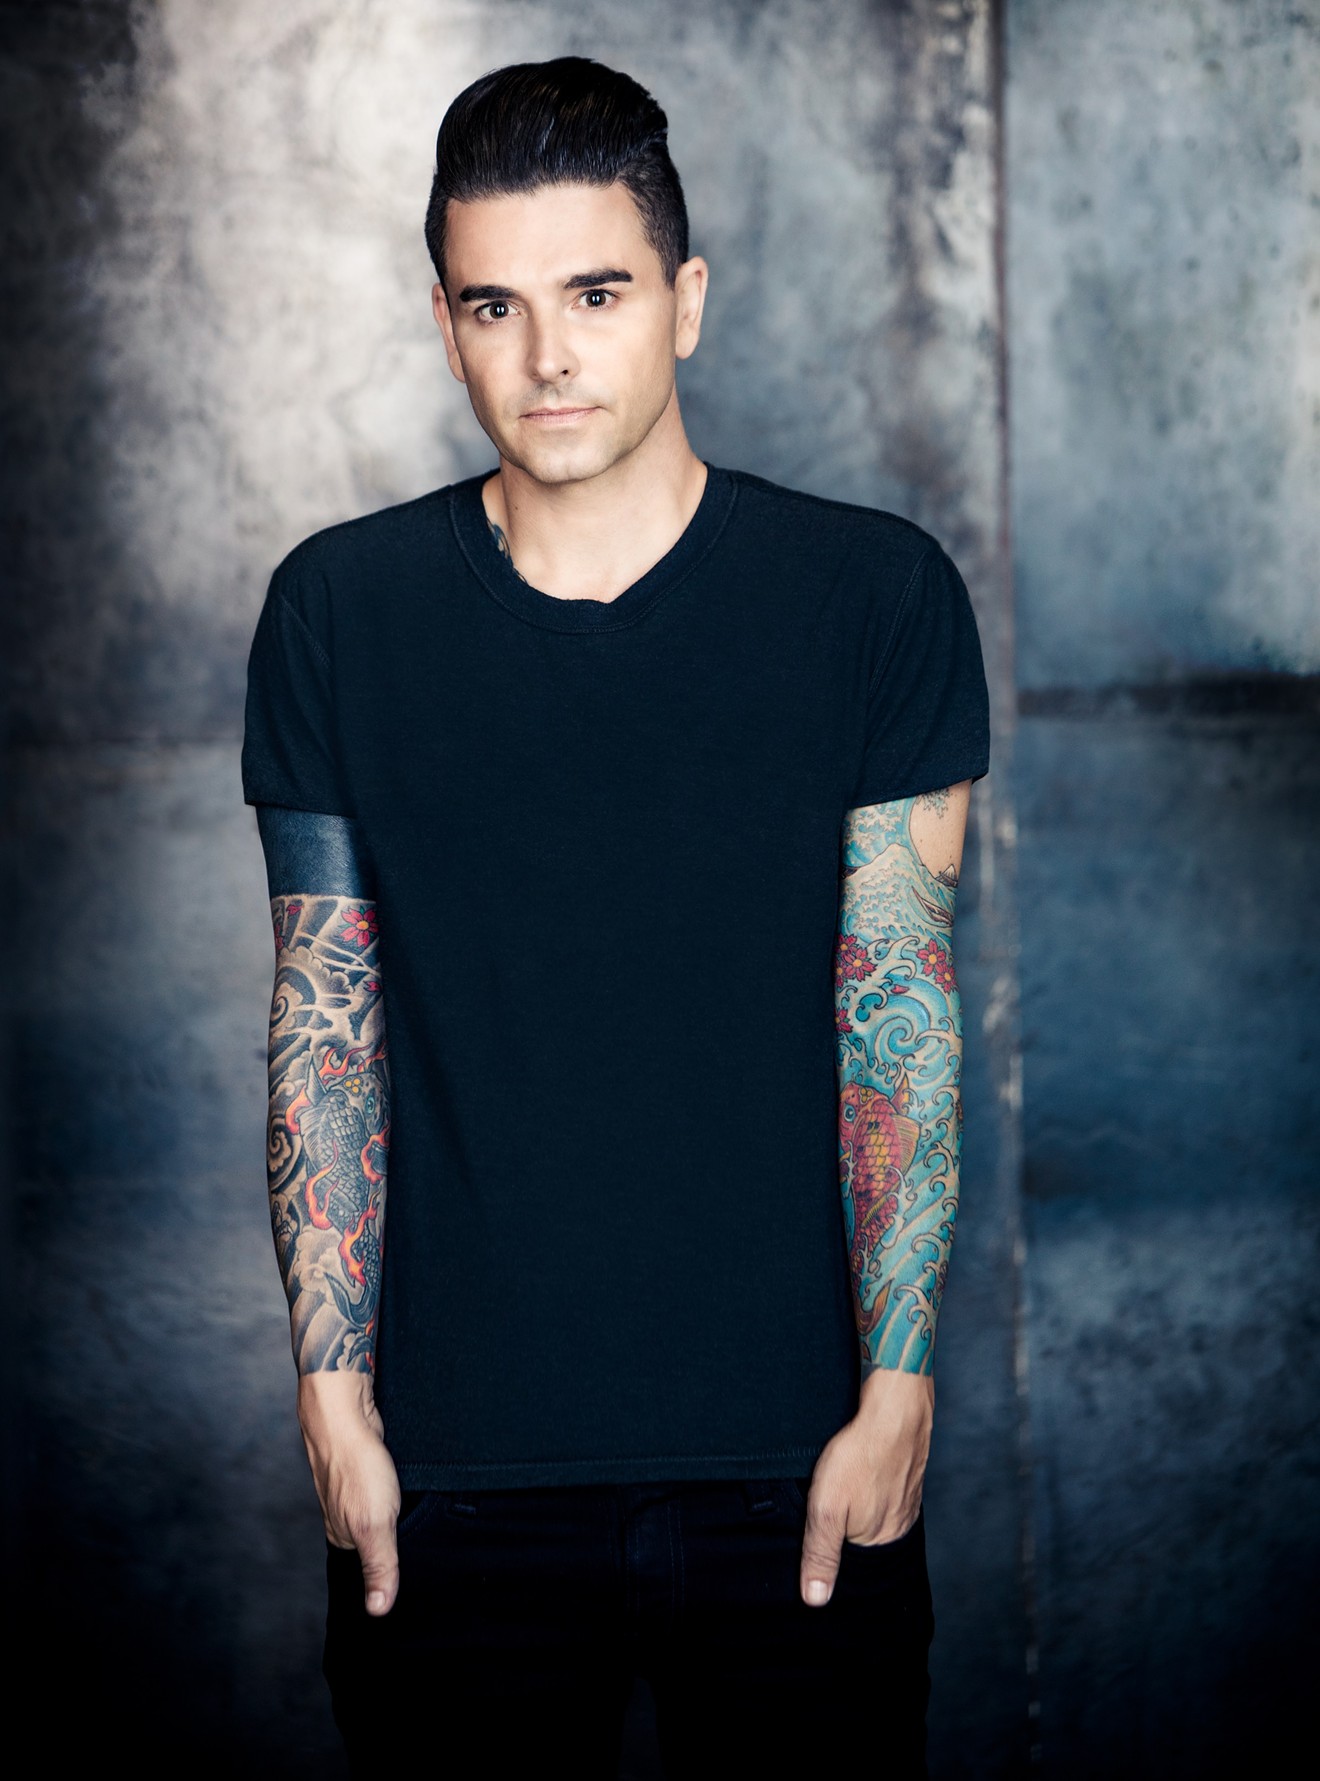 Chris Carrabba says Dallas latched on to Dashboard Confessional early on.